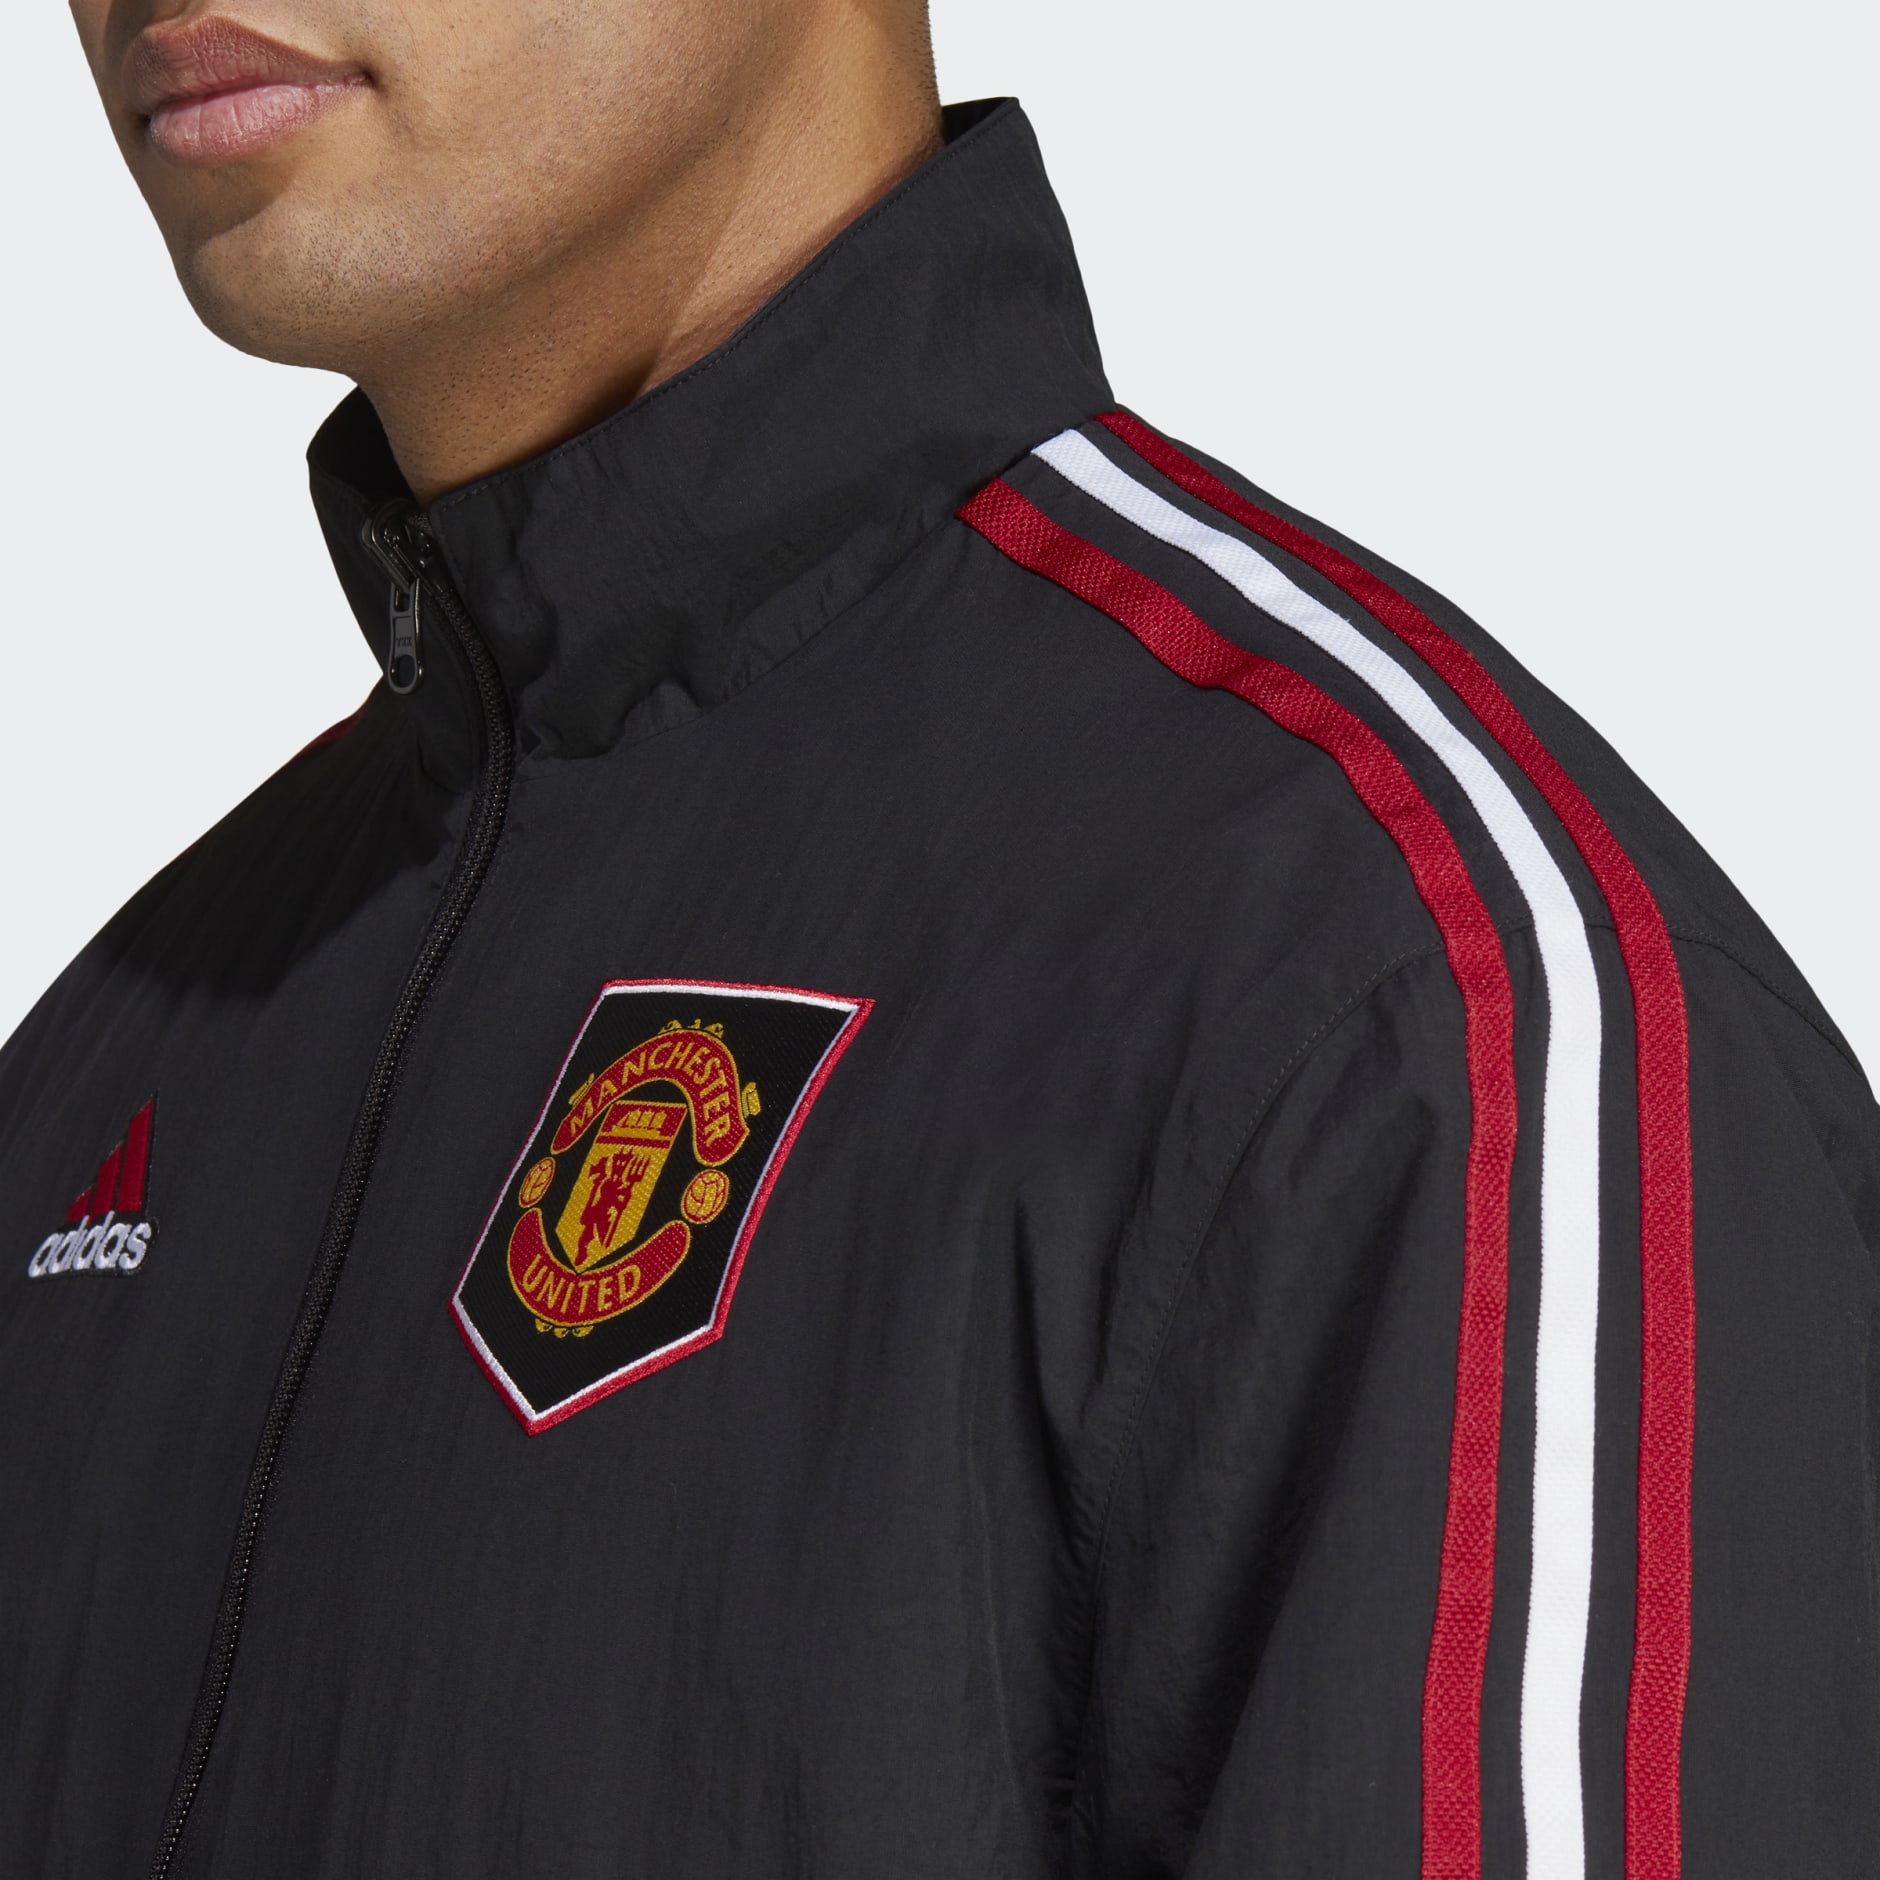 adidas Manchester United All Over Print 1/4 zip Training Top